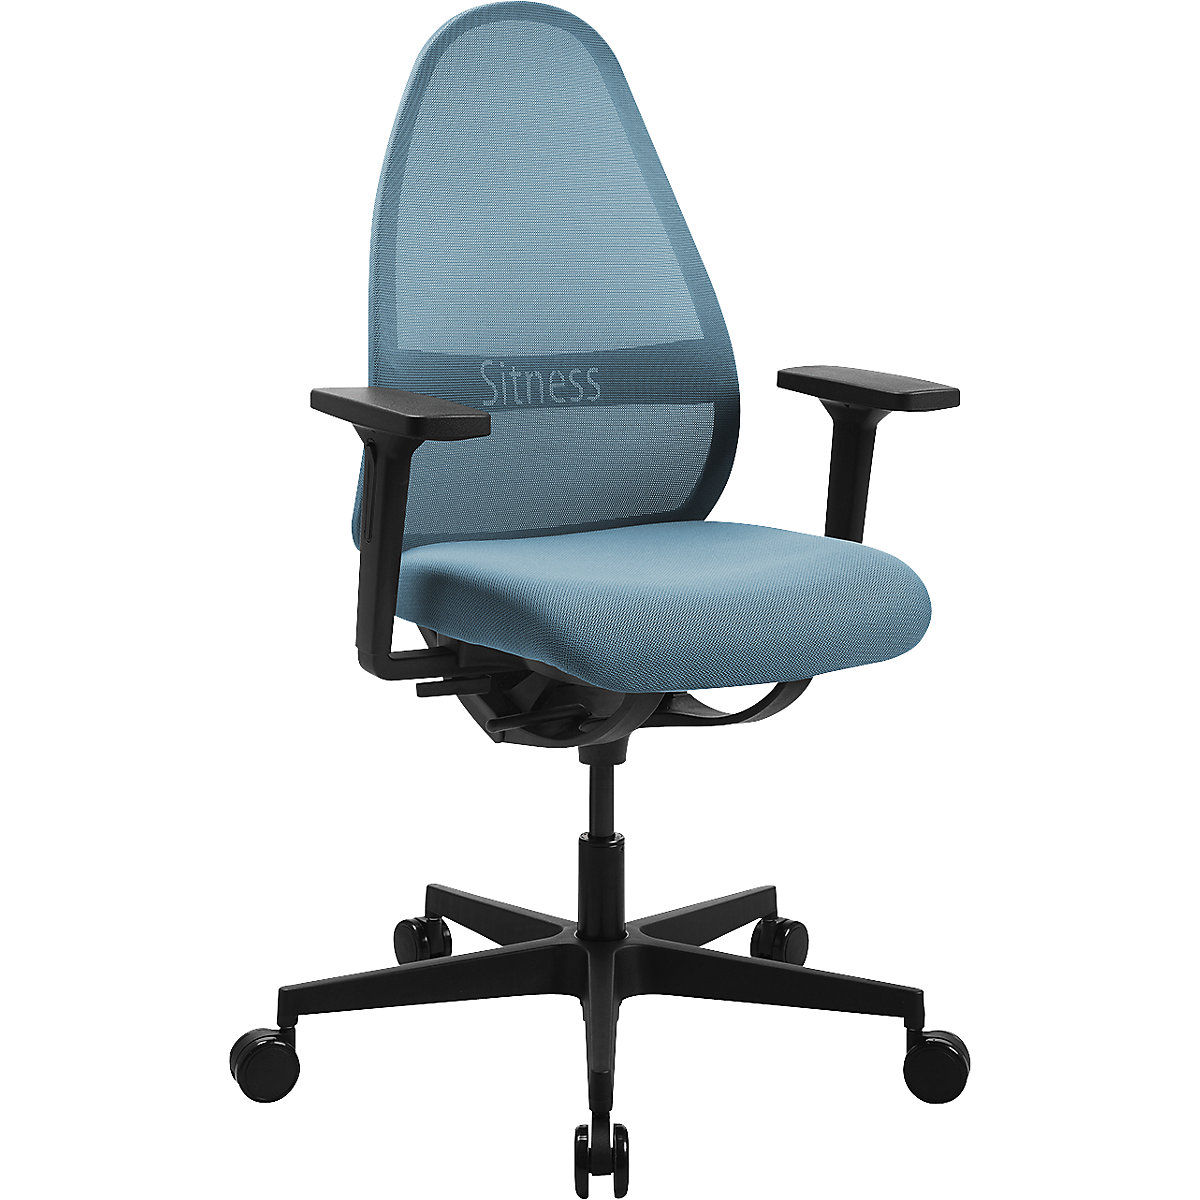 SOFT SITNESS ART office swivel chair – Topstar, synchronous mechanism, with arm rests, blue-2